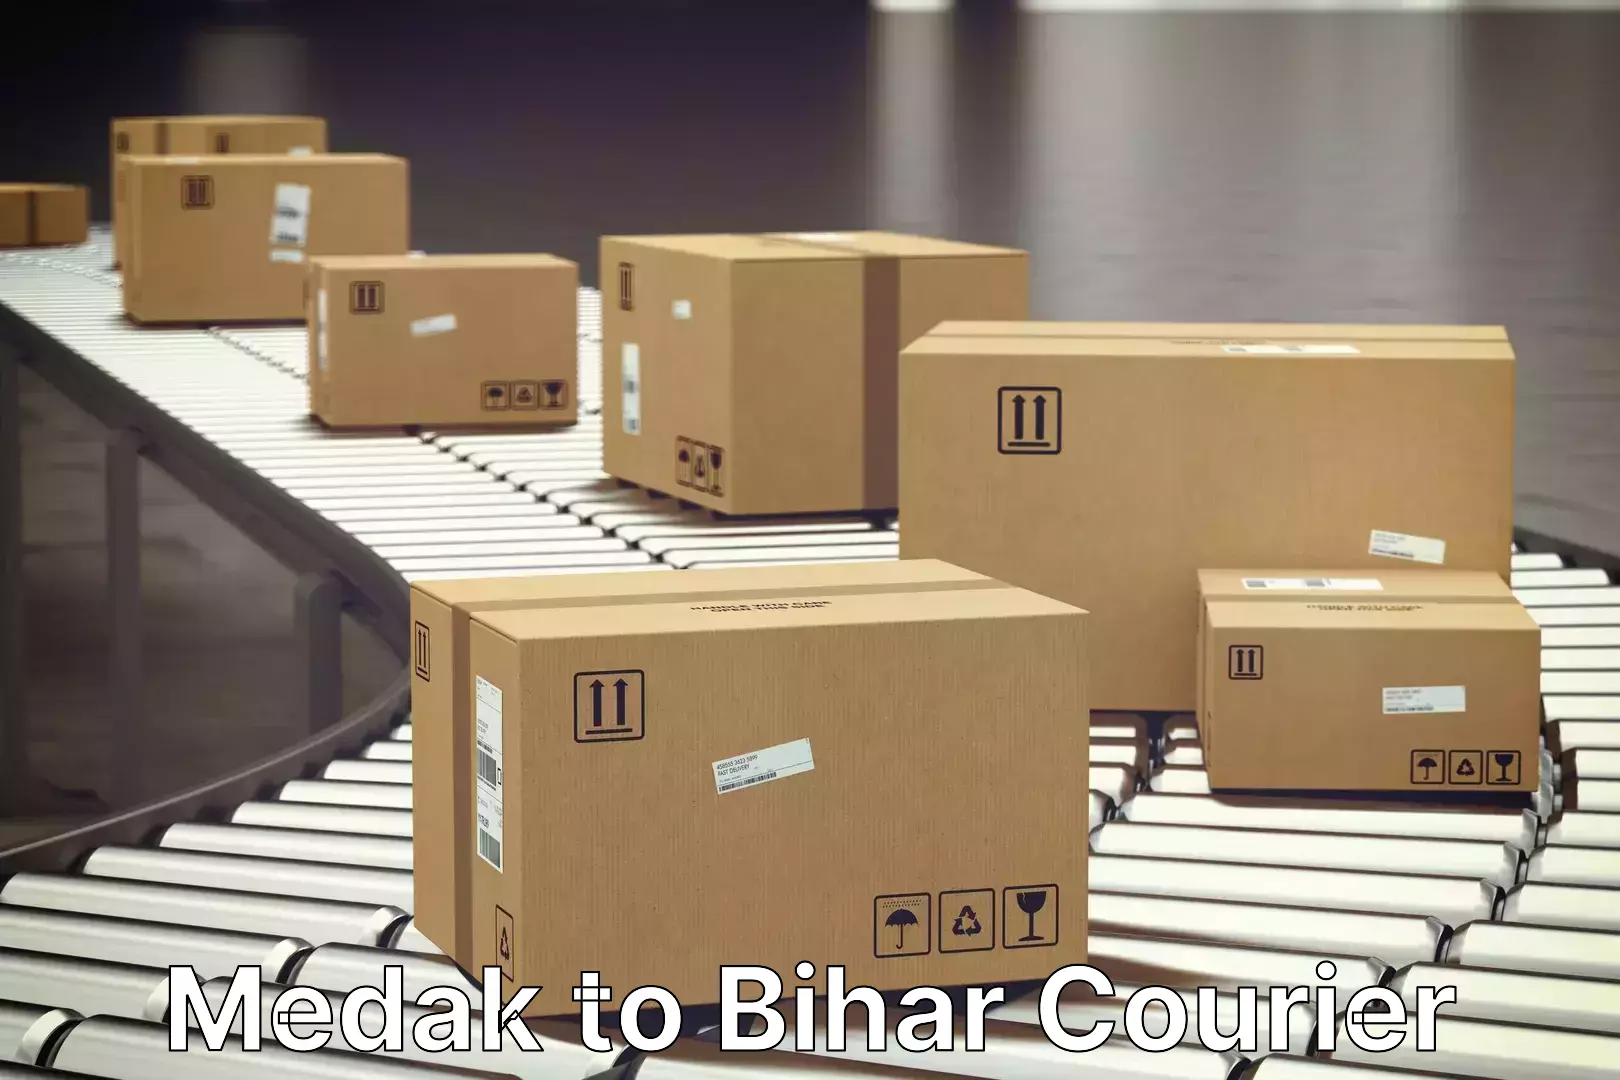 Moving and storage services Medak to Bihar